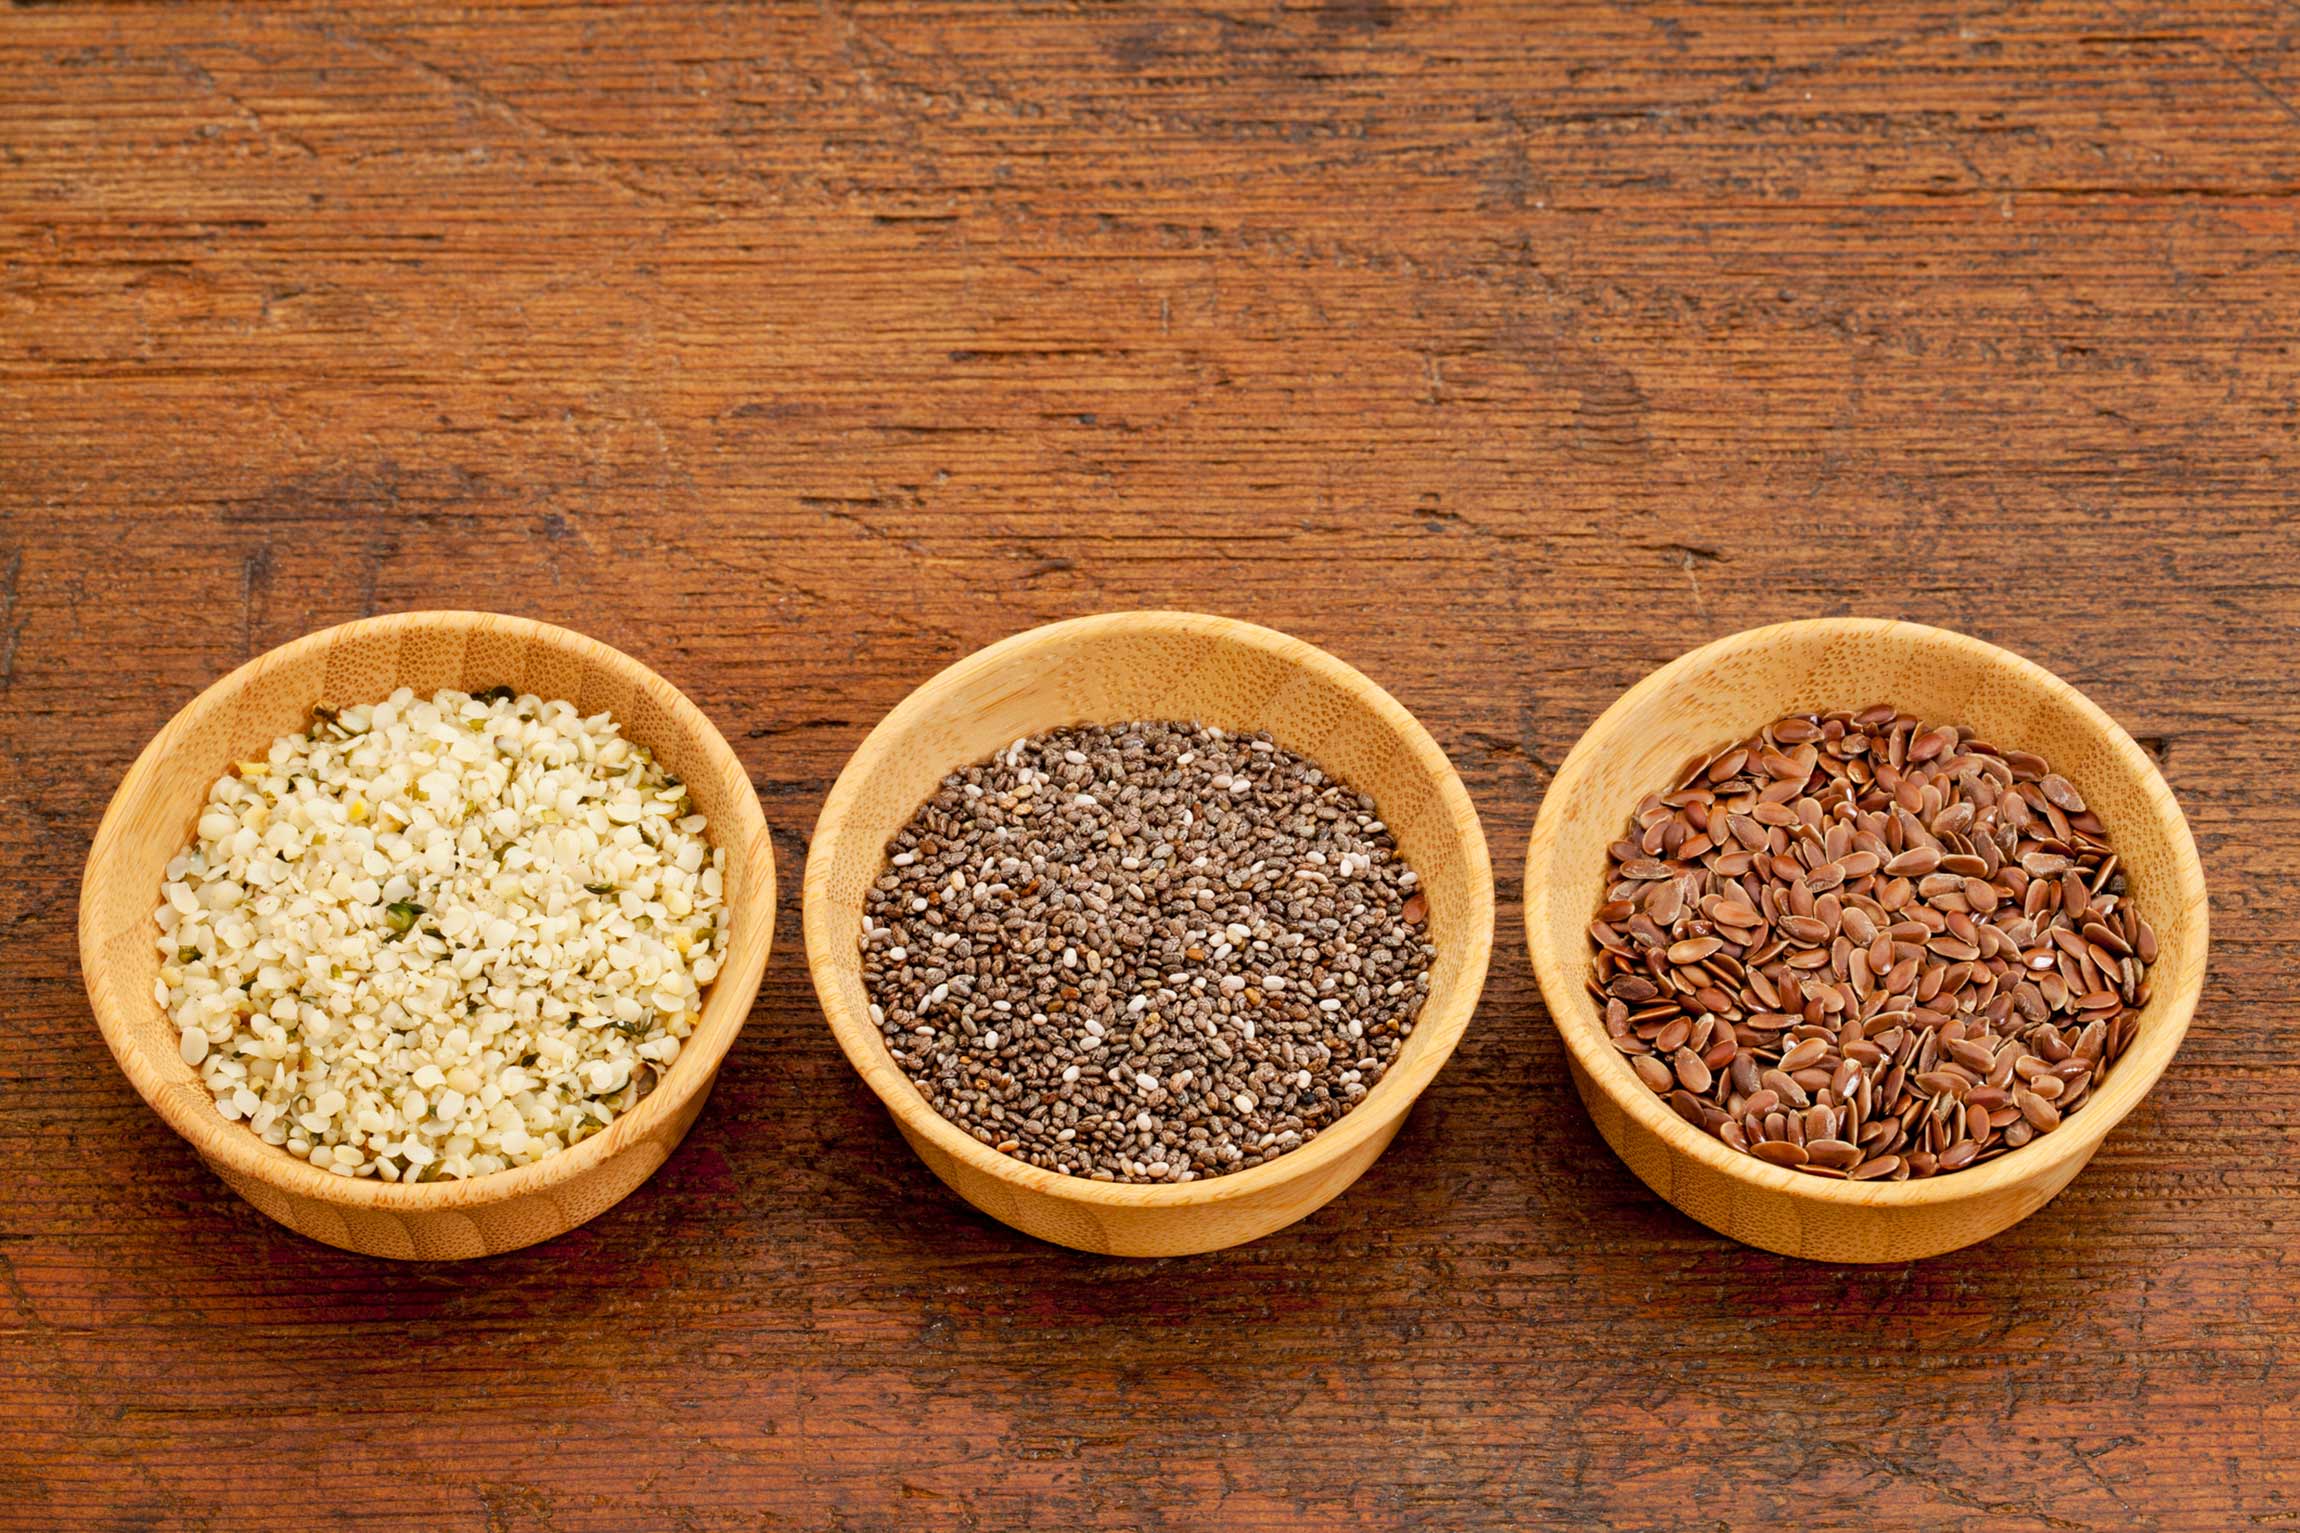 plant-based protein sources: hemp seeds, chia seeds, flax seeds